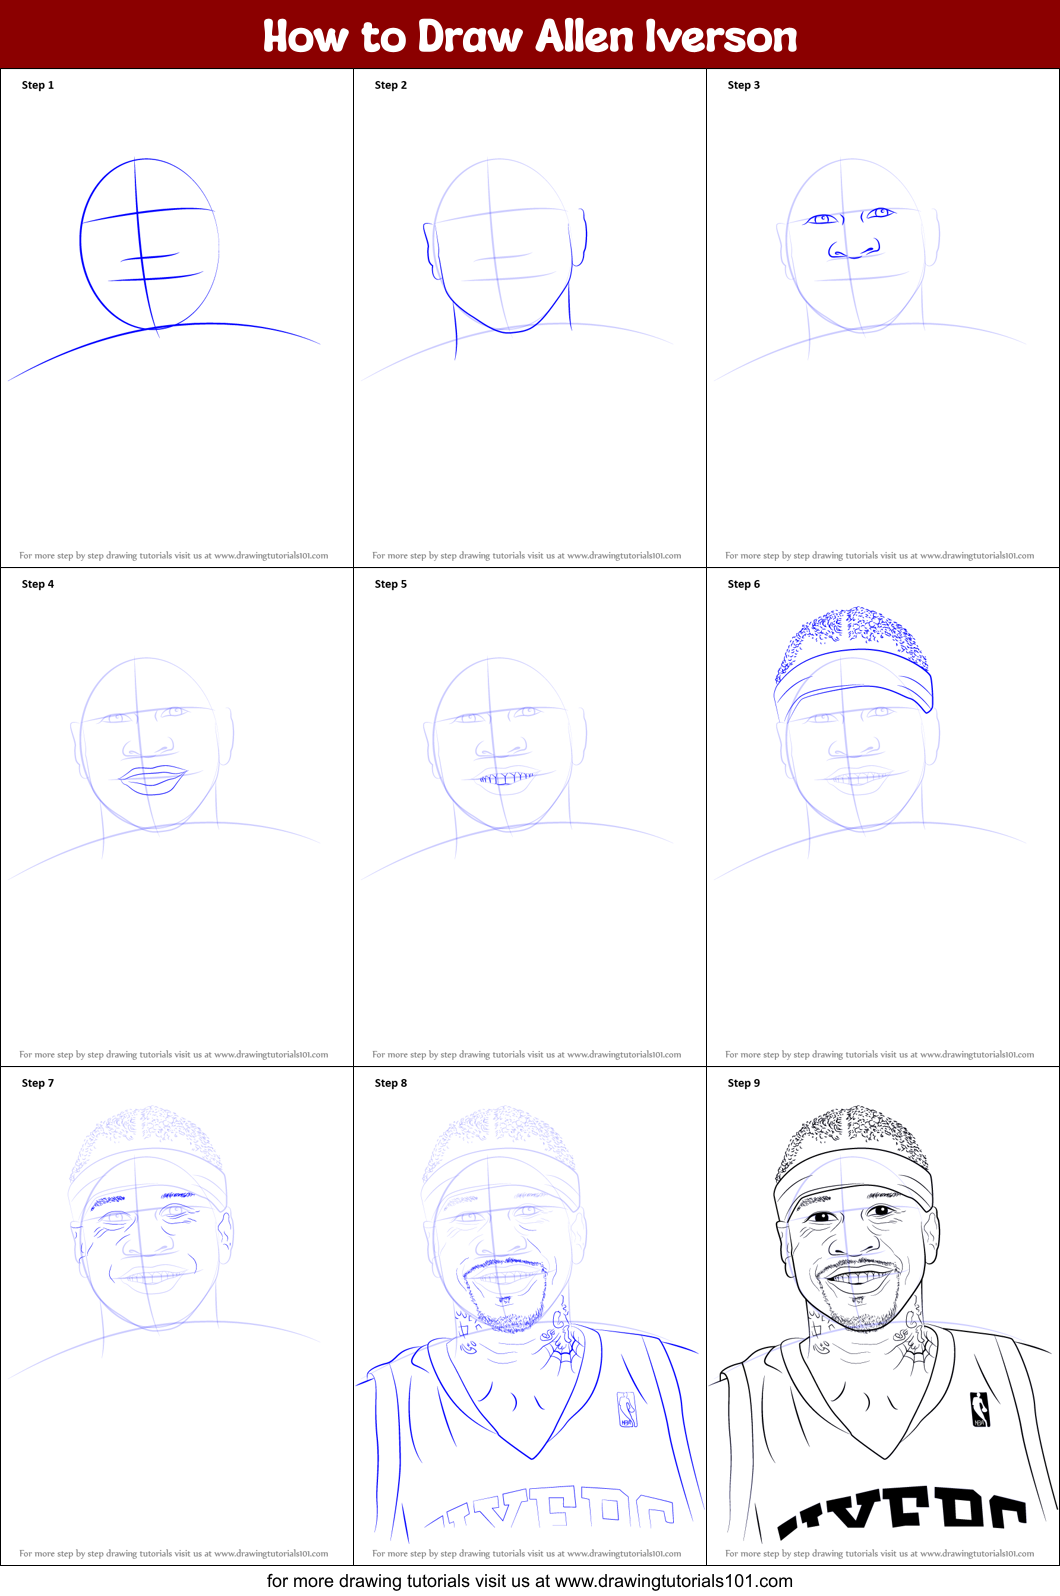 How to Draw Allen Iverson (Basketball Players) Step by Step